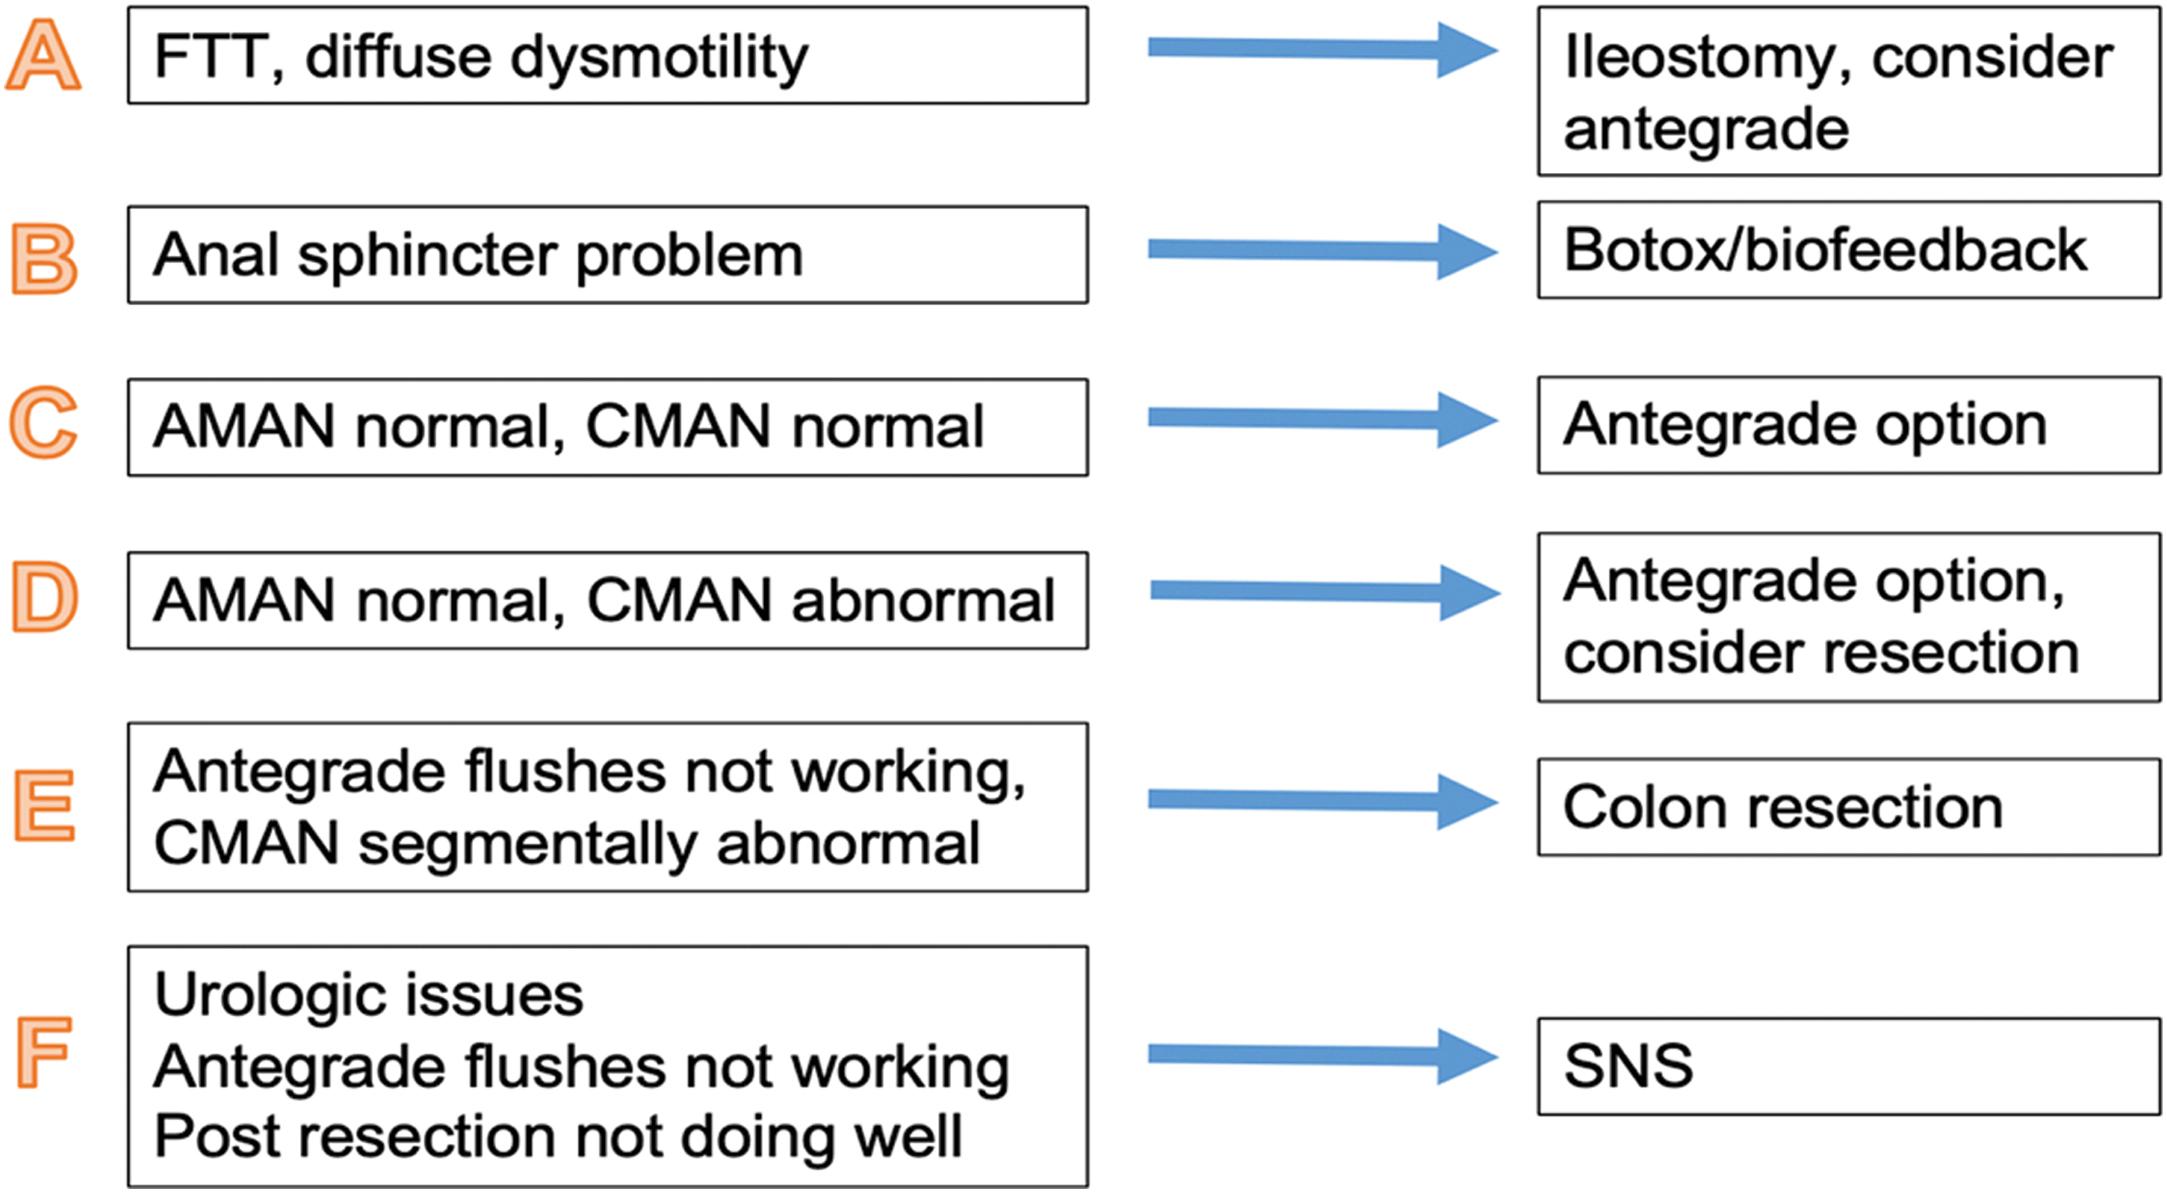 Fig. 11-3, Algorithm for workup of colonic dysmotility is shown. AMAN, anal manometry; CMAN, colonic manometry; SNS, sacral nerve stimulator; FTT, failure to thrive.